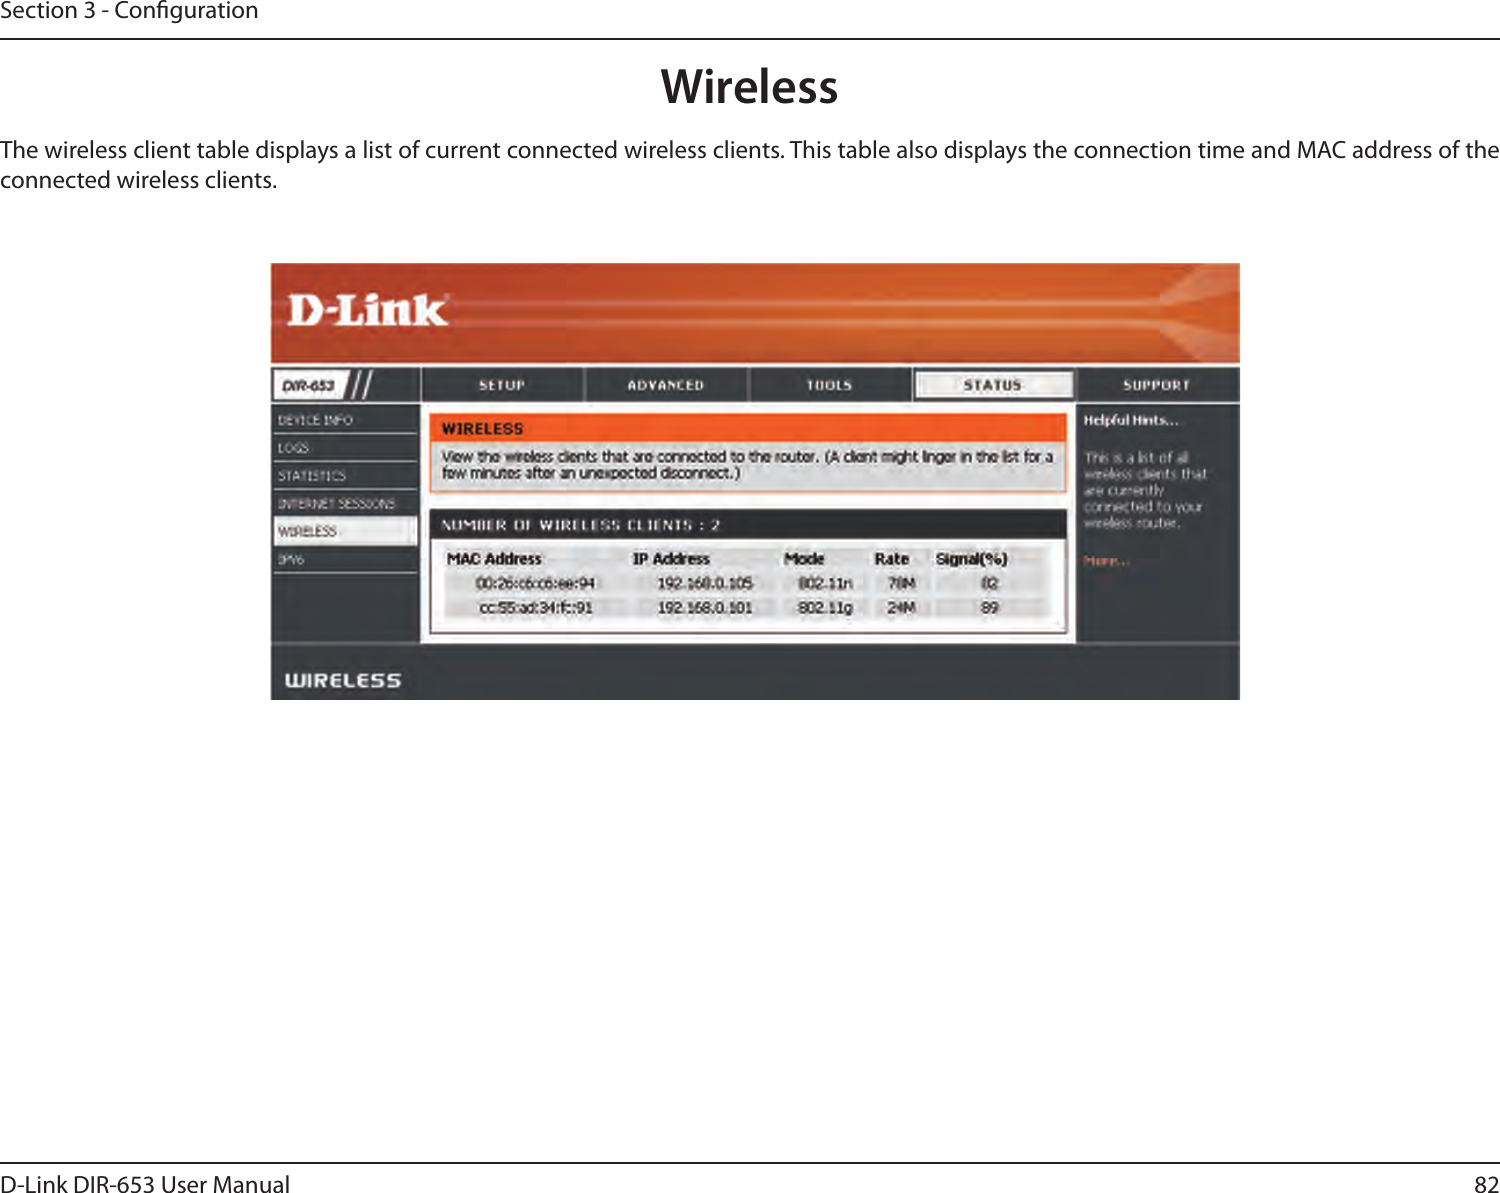 82D-Link DIR-653 User ManualSection 3 - CongurationThe wireless client table displays a list of current connected wireless clients. This table also displays the connection time and MAC address of the connected wireless clients.Wireless